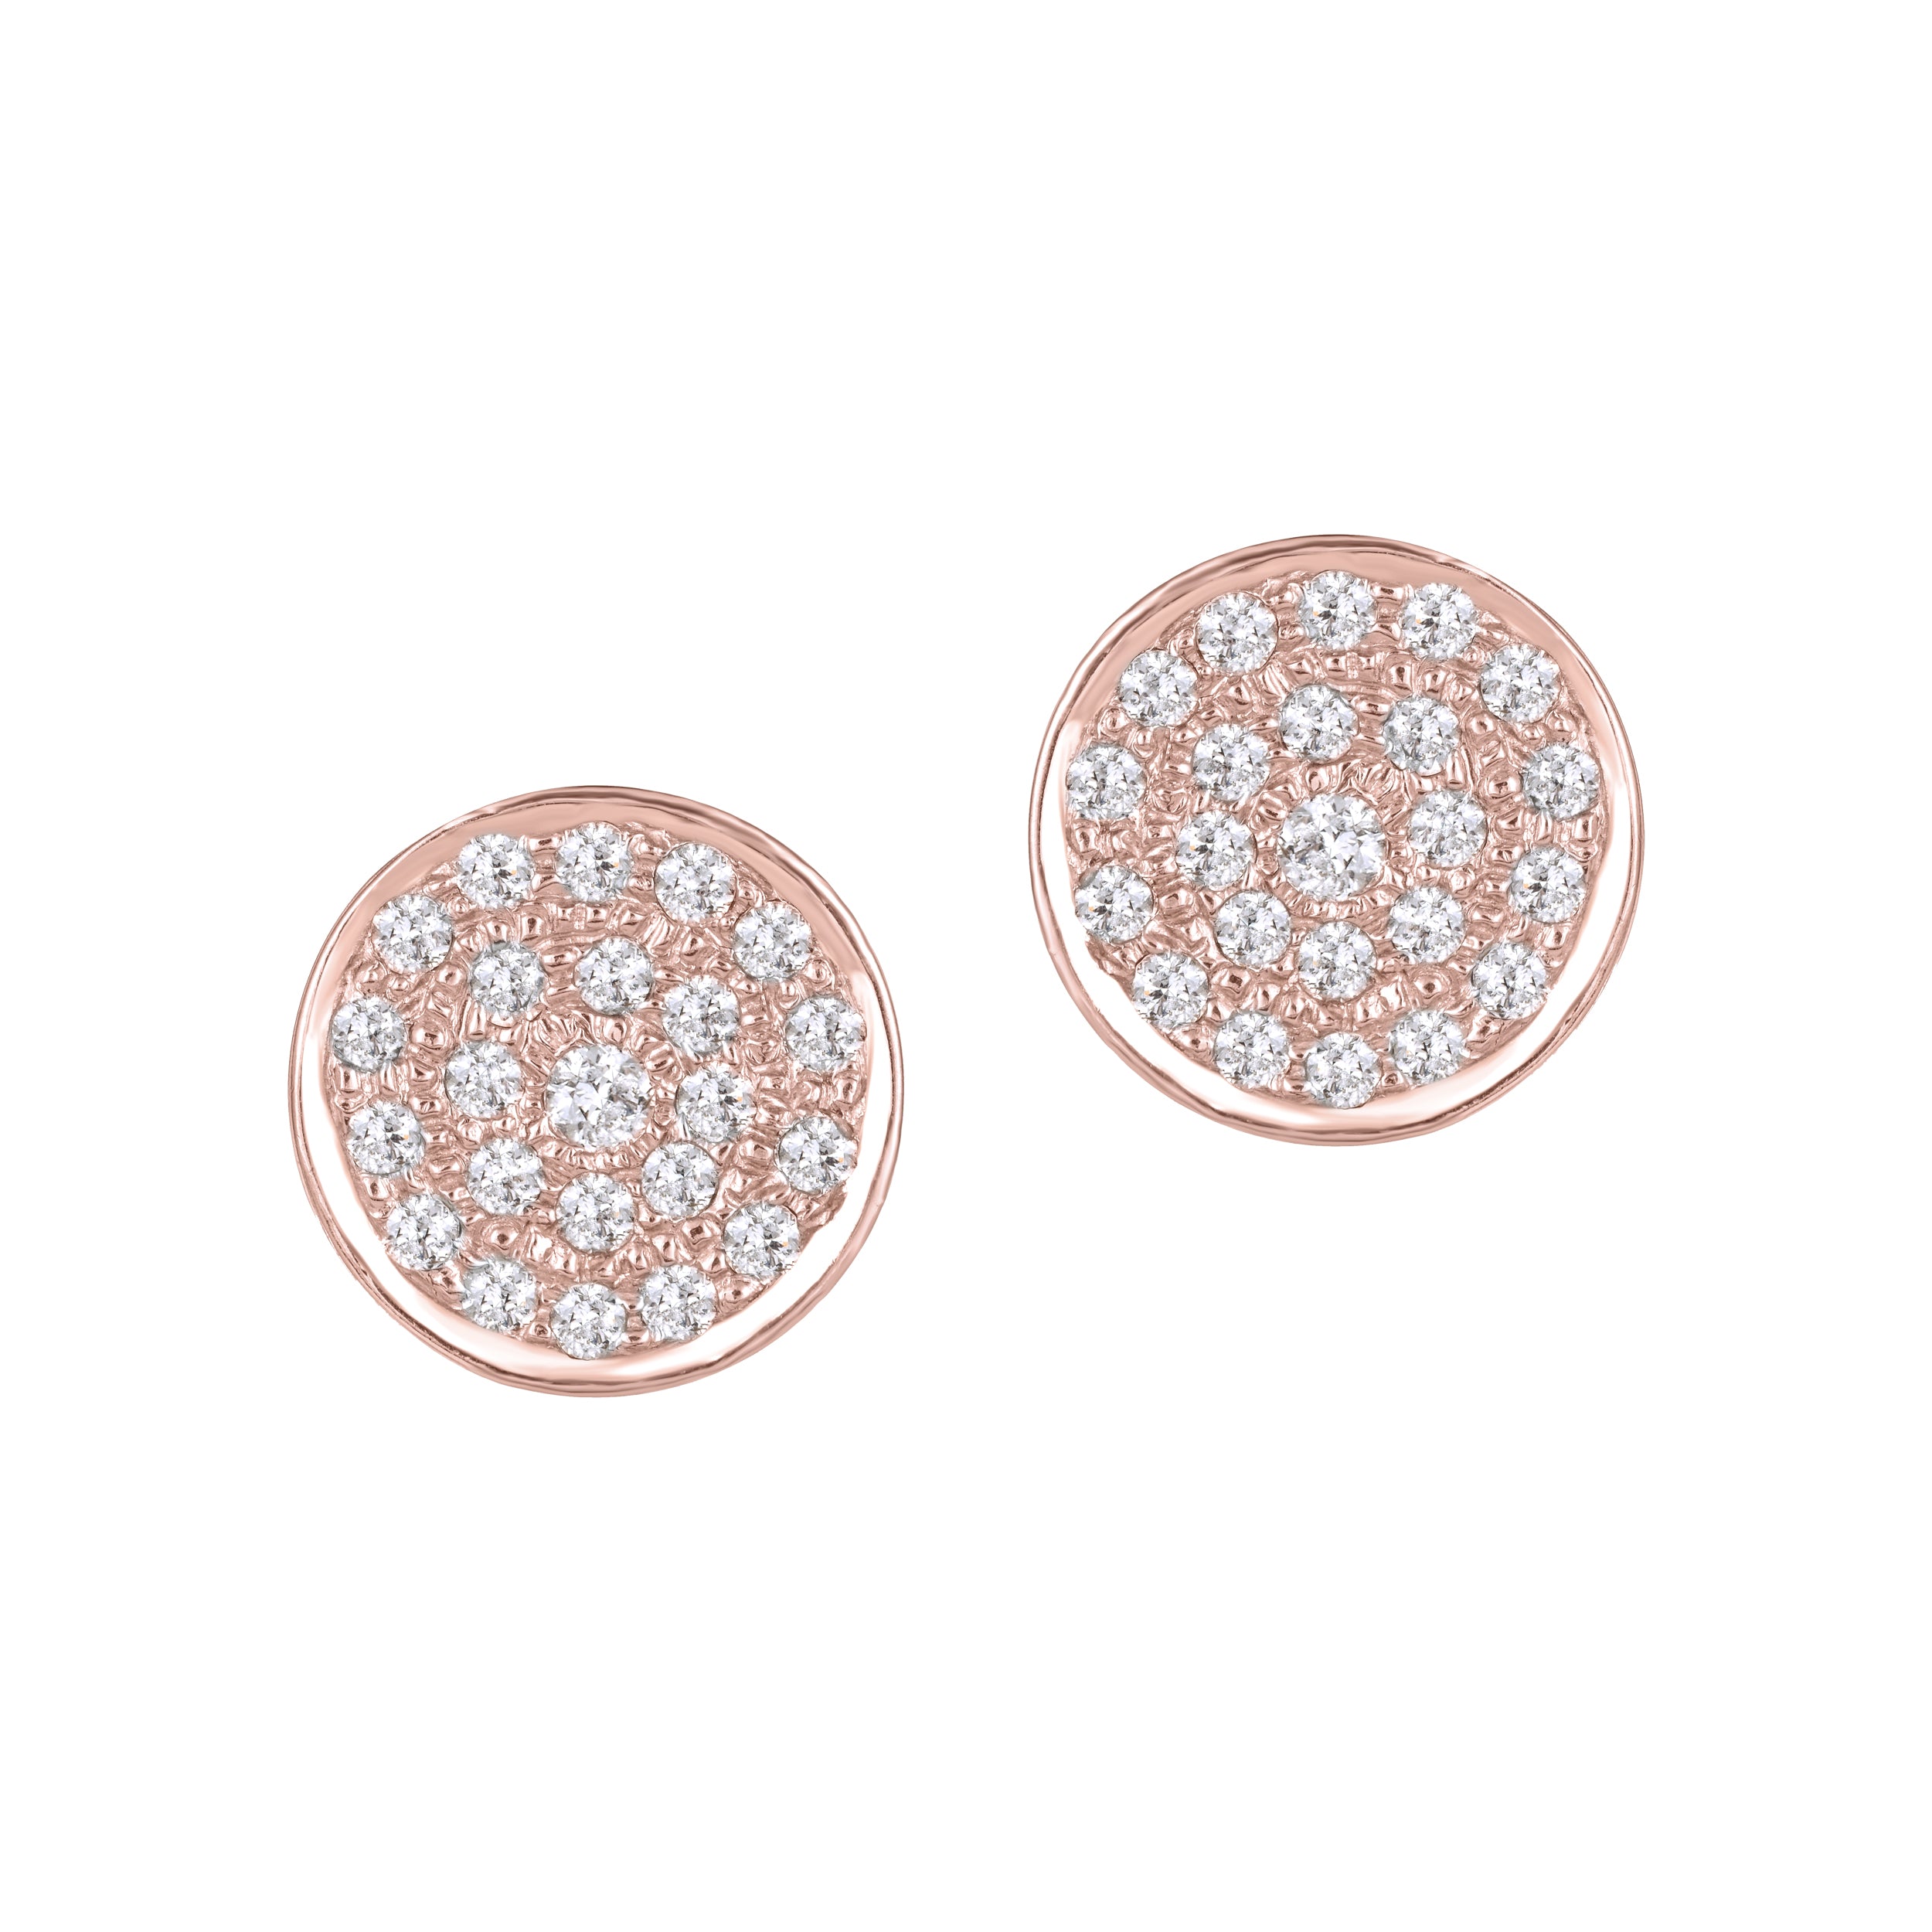 1.50 Ct Round Simulated Diamond Floral Style Stud Earrings 14K Rose Gold  Plated | eBay